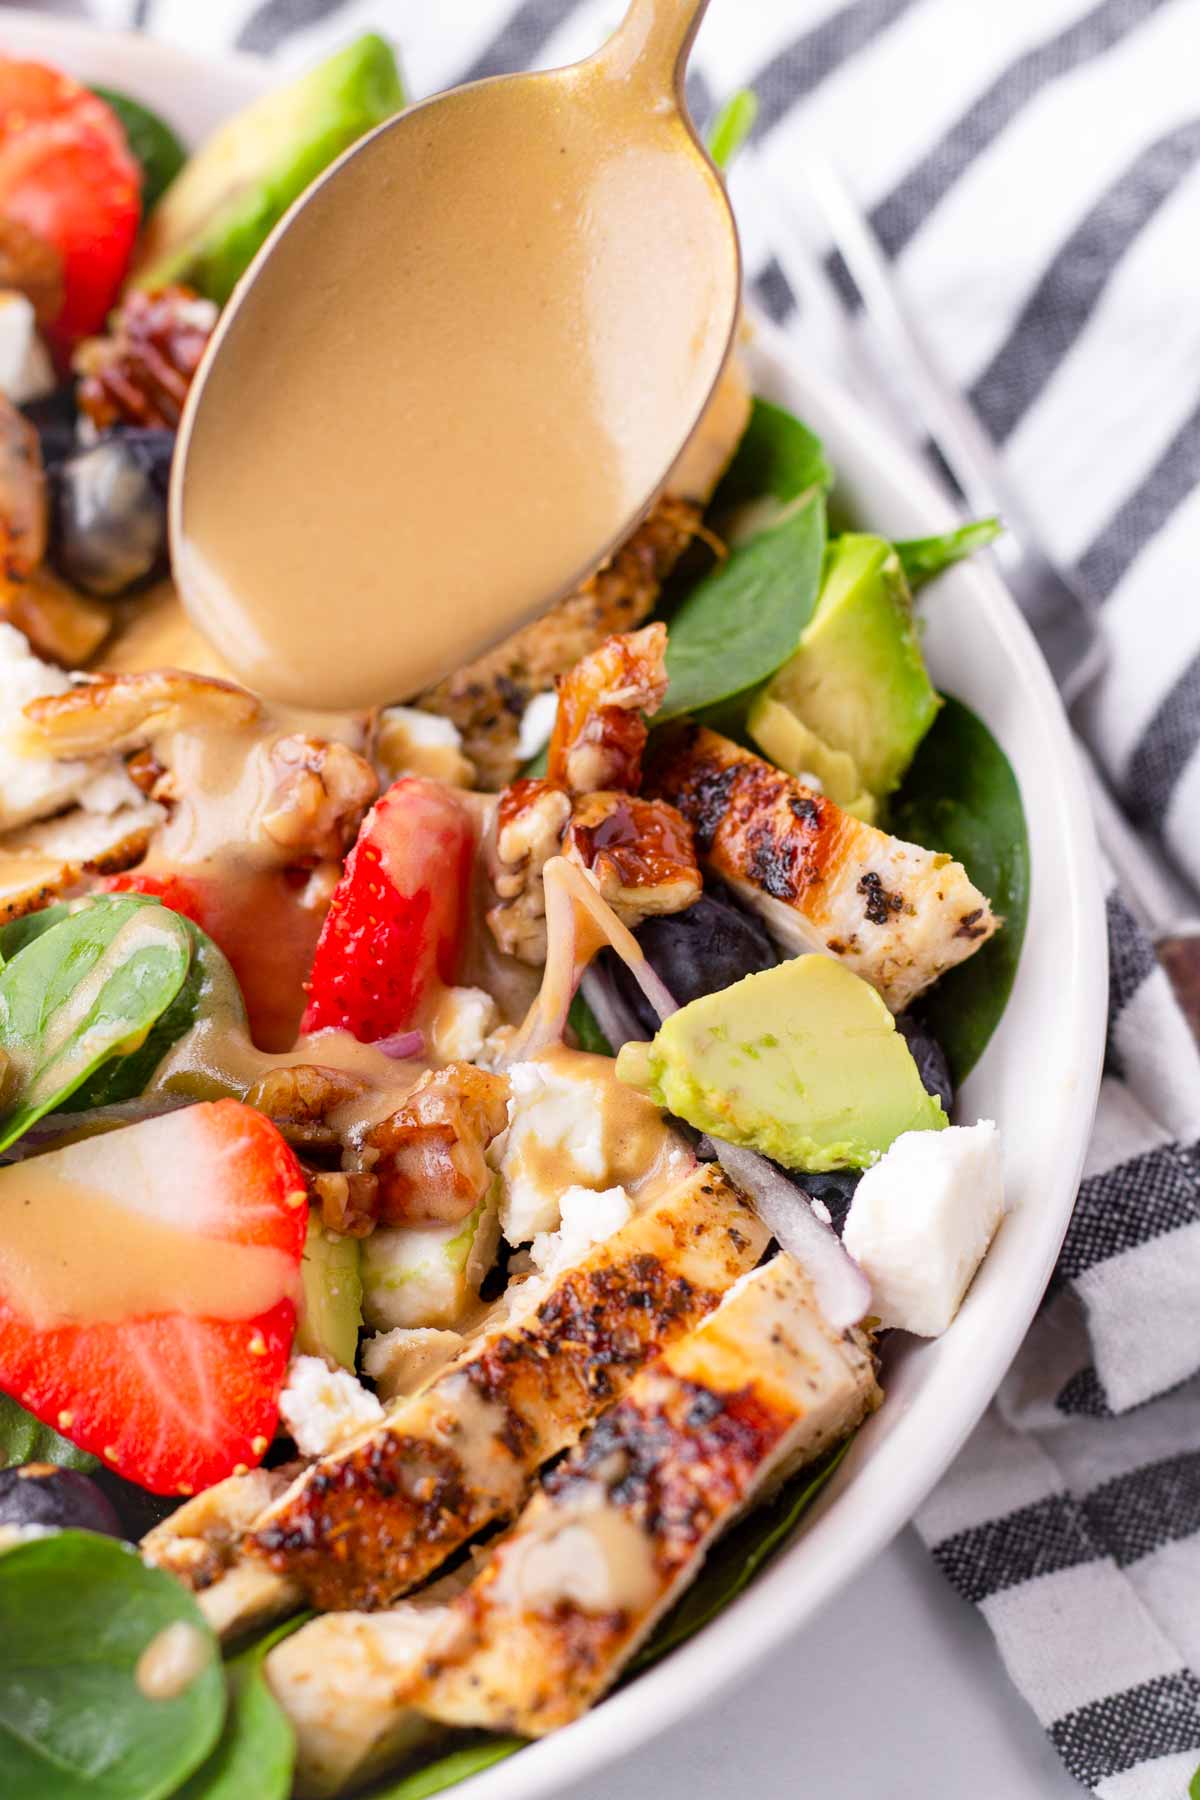 a spoon drizzling creamy balsamic dressing over salad